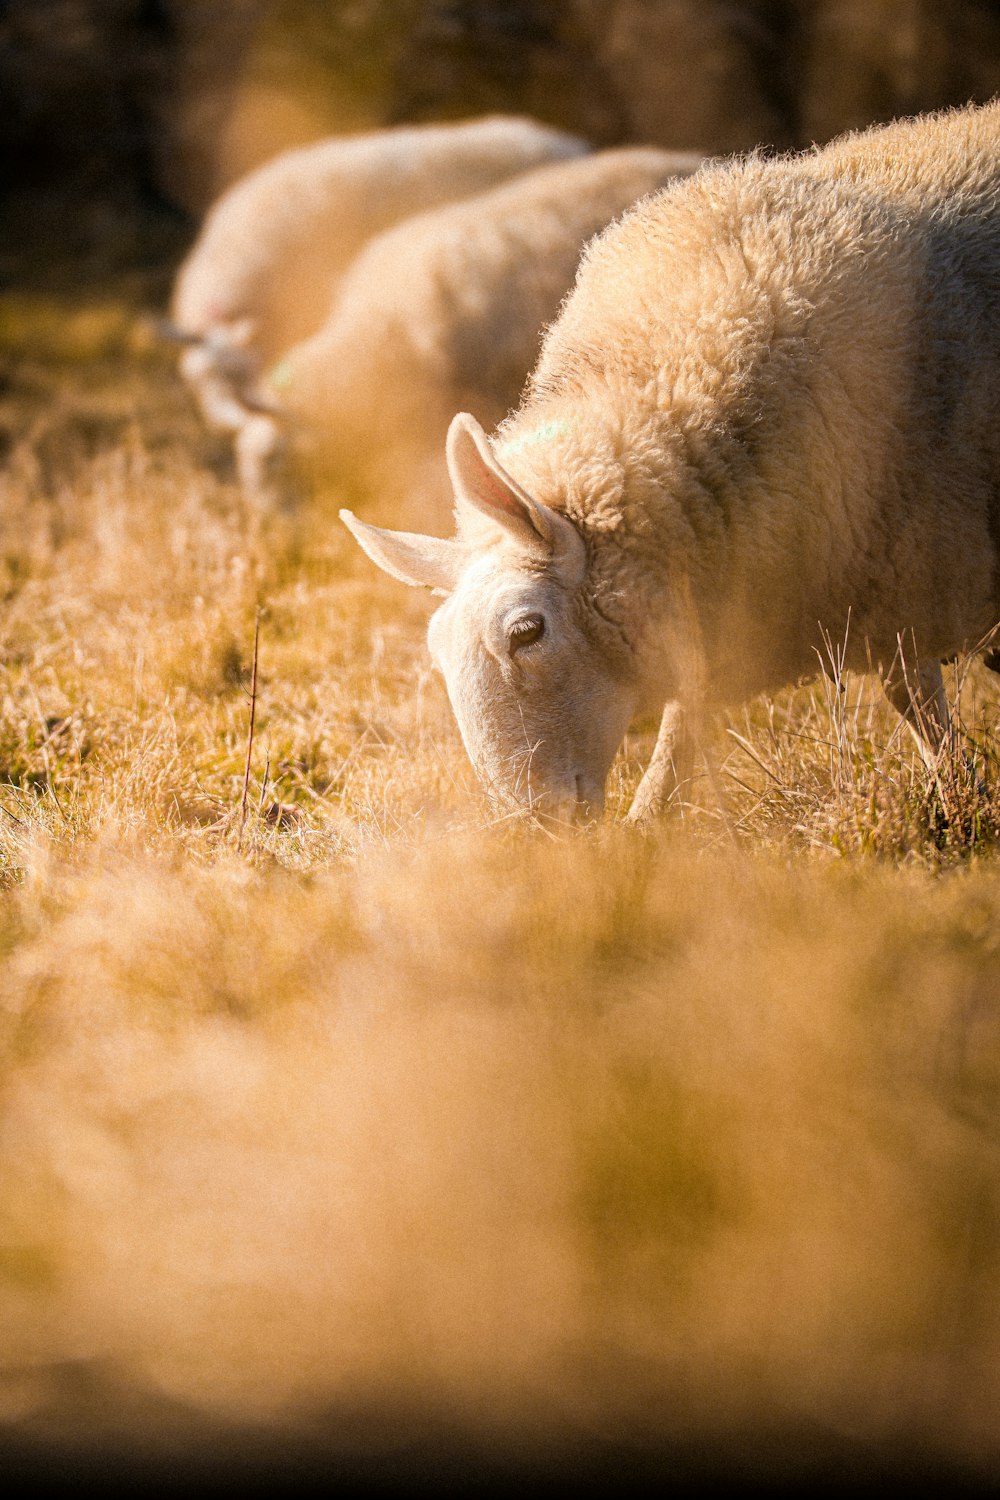 a group of sheep grazing on a dry grass field